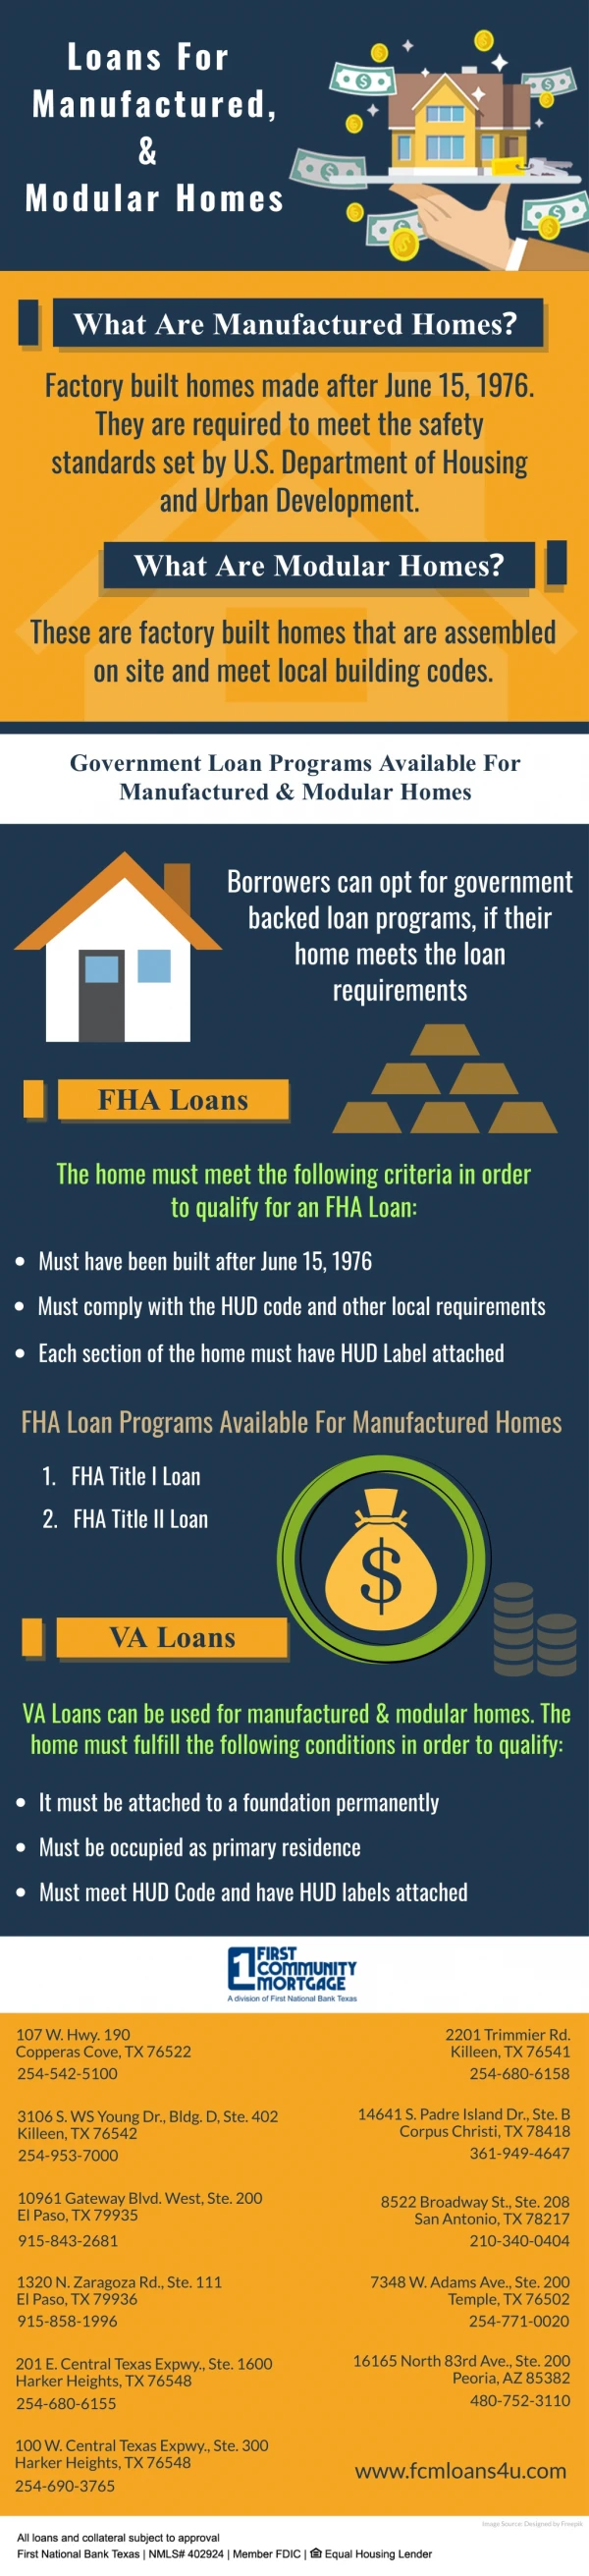 Loans For Manufactured & Modular Homes